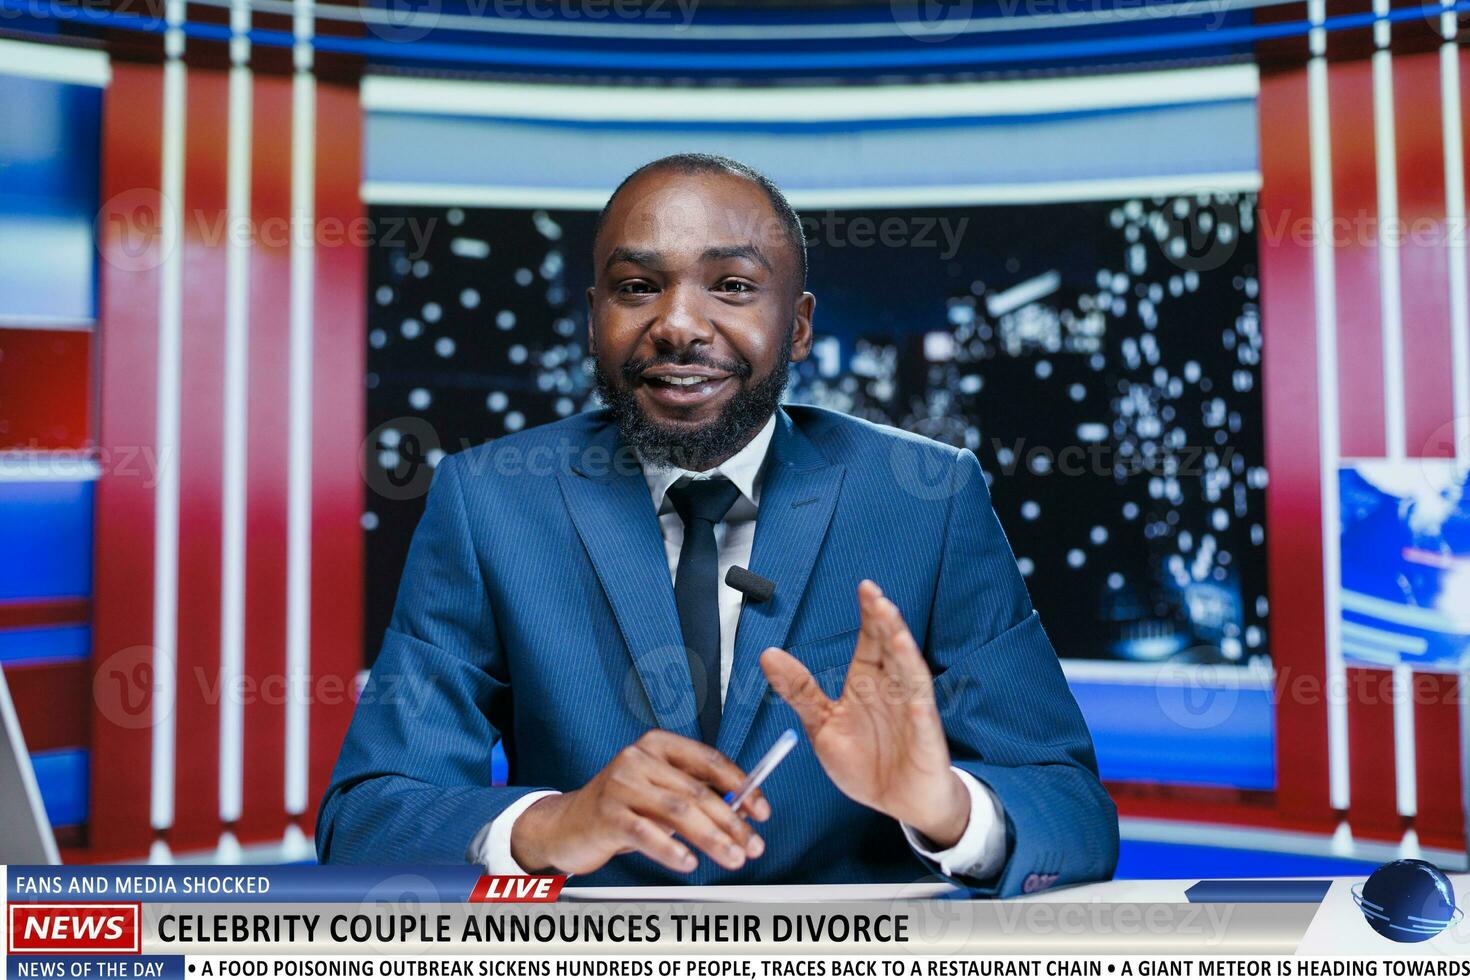 Host reveals famous couple divorcing on live television night show, presenter doing media reportage abut celebrities ending marriage in news studio. African american entertainment journalist. photo